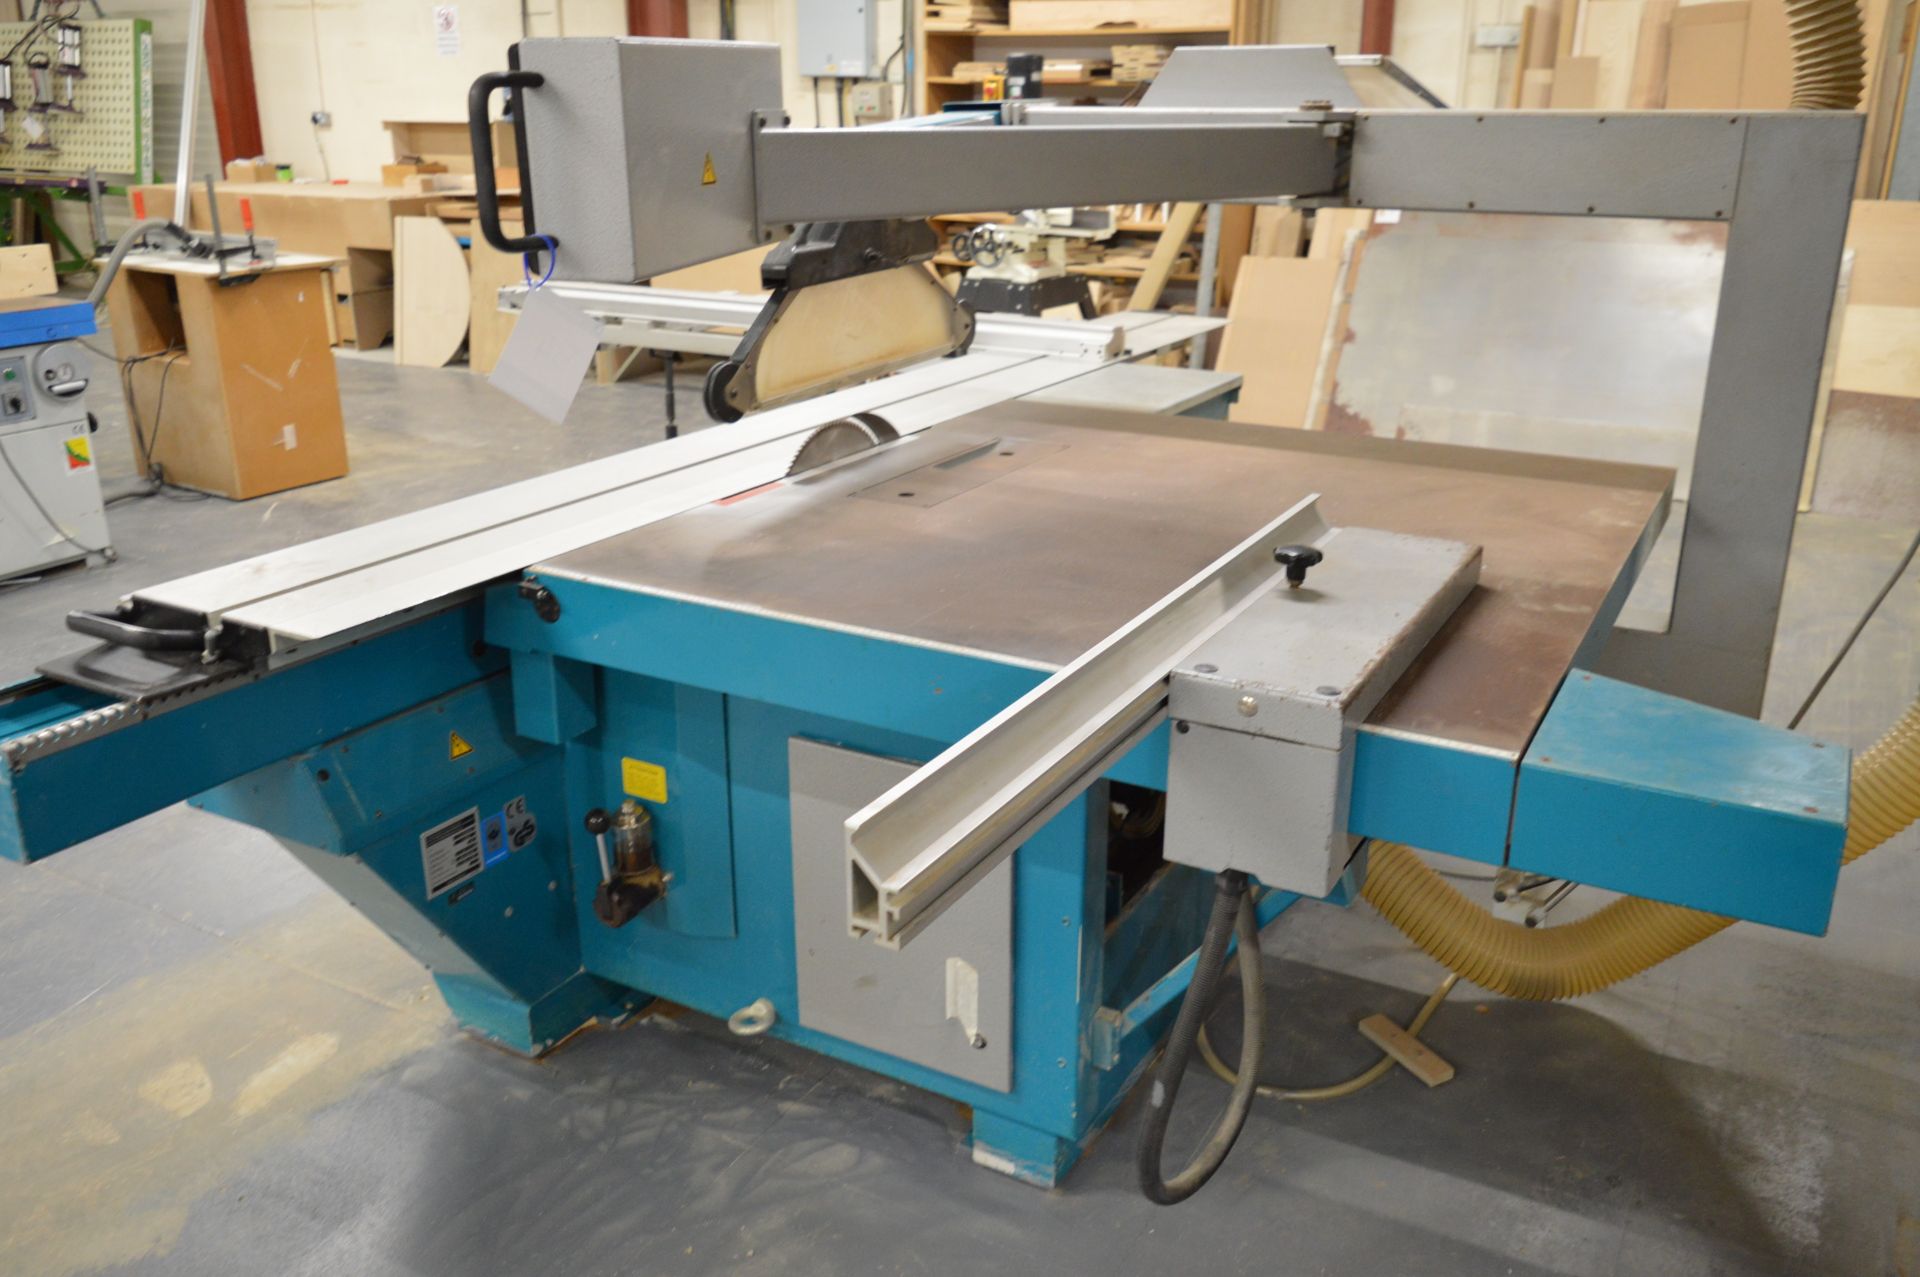 Martin T73 automatic sliding panel saw, Serial No. V429906 (2002), Saw Blade. Min 250mm / Max. - Image 6 of 7